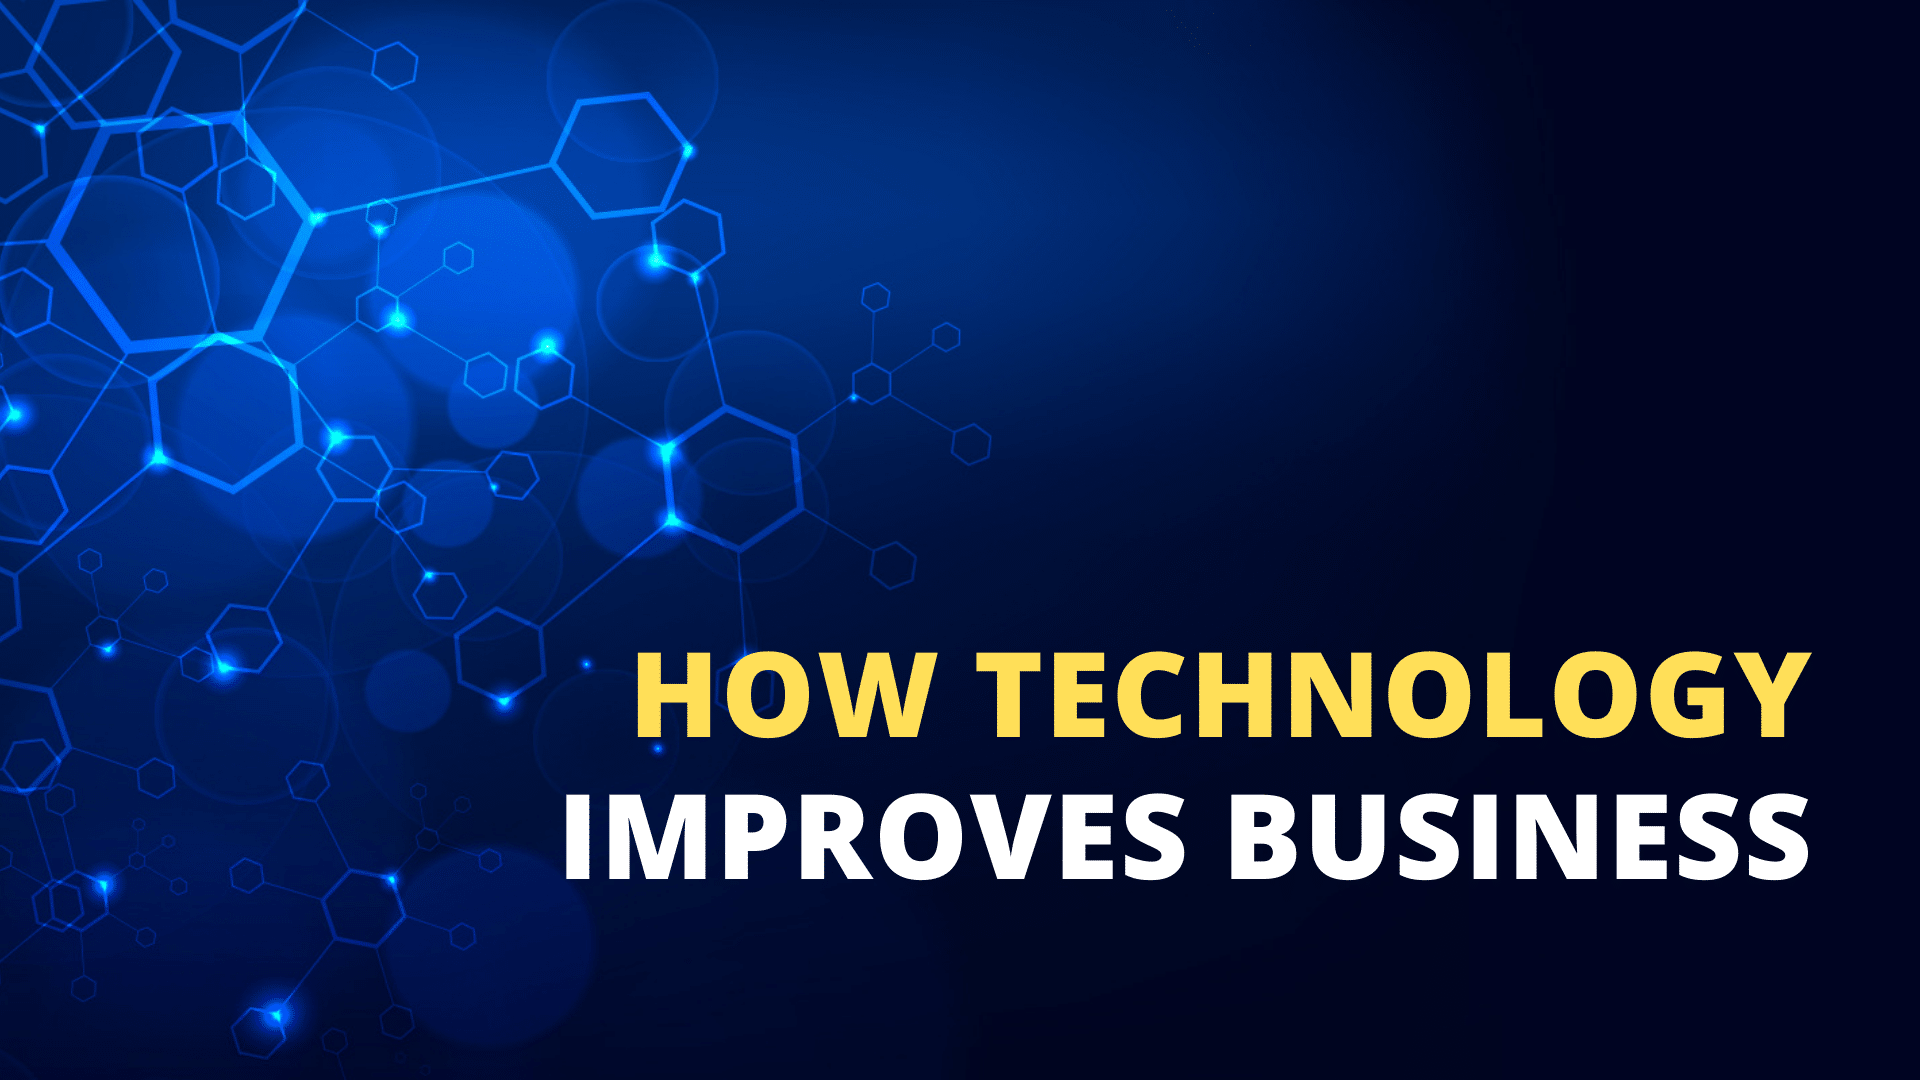 7 Ways Technology Can Improve Your Business